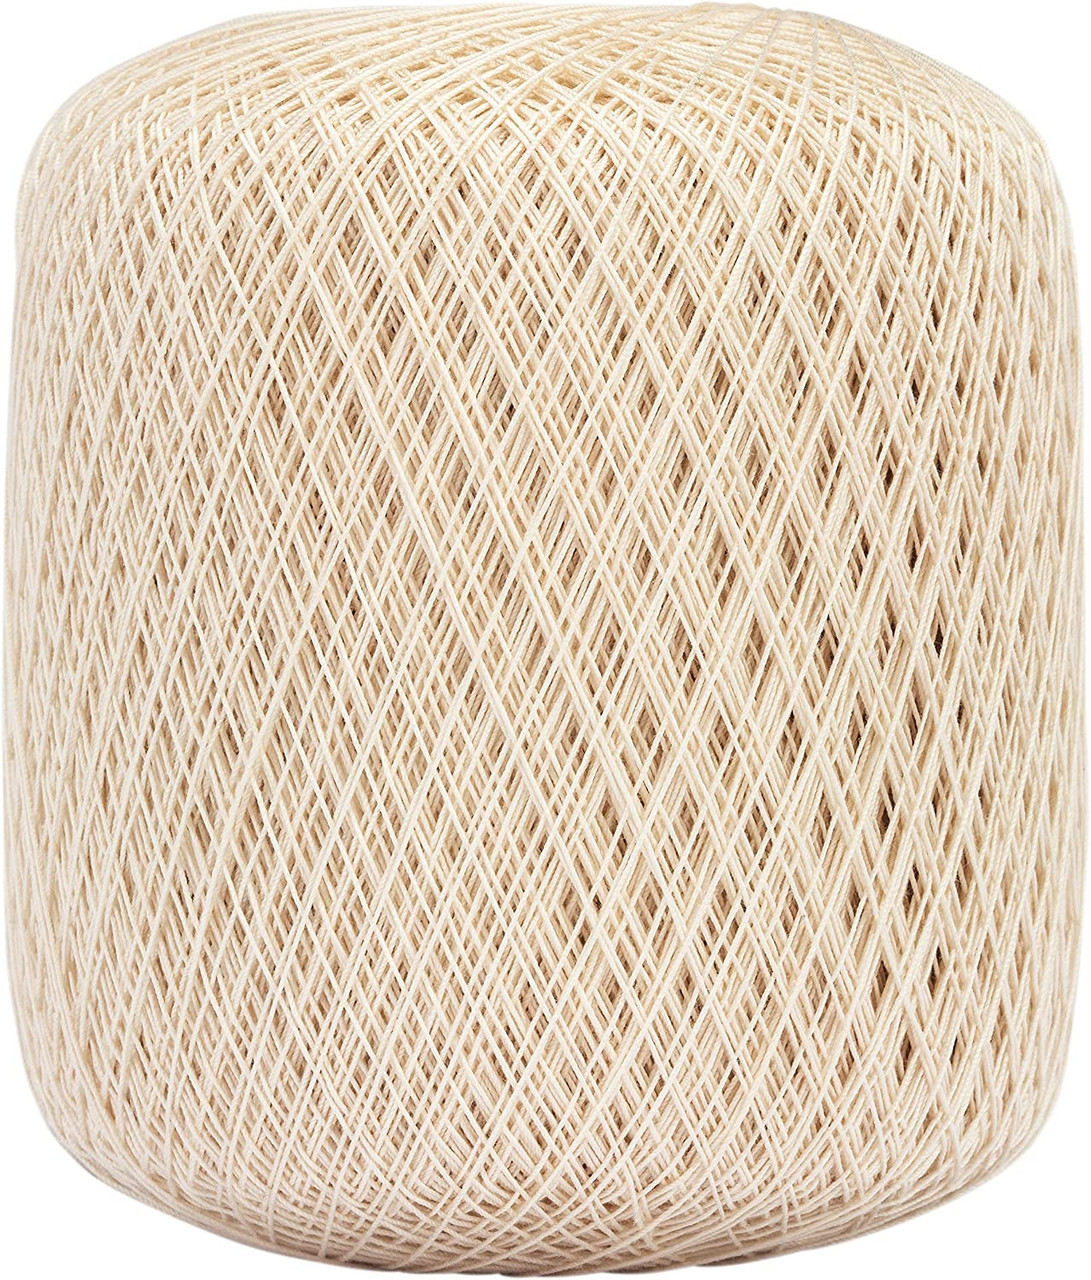 Aunt Lydia's Fashion Crochet Thread Size 3 - Natural, Multipack of 12